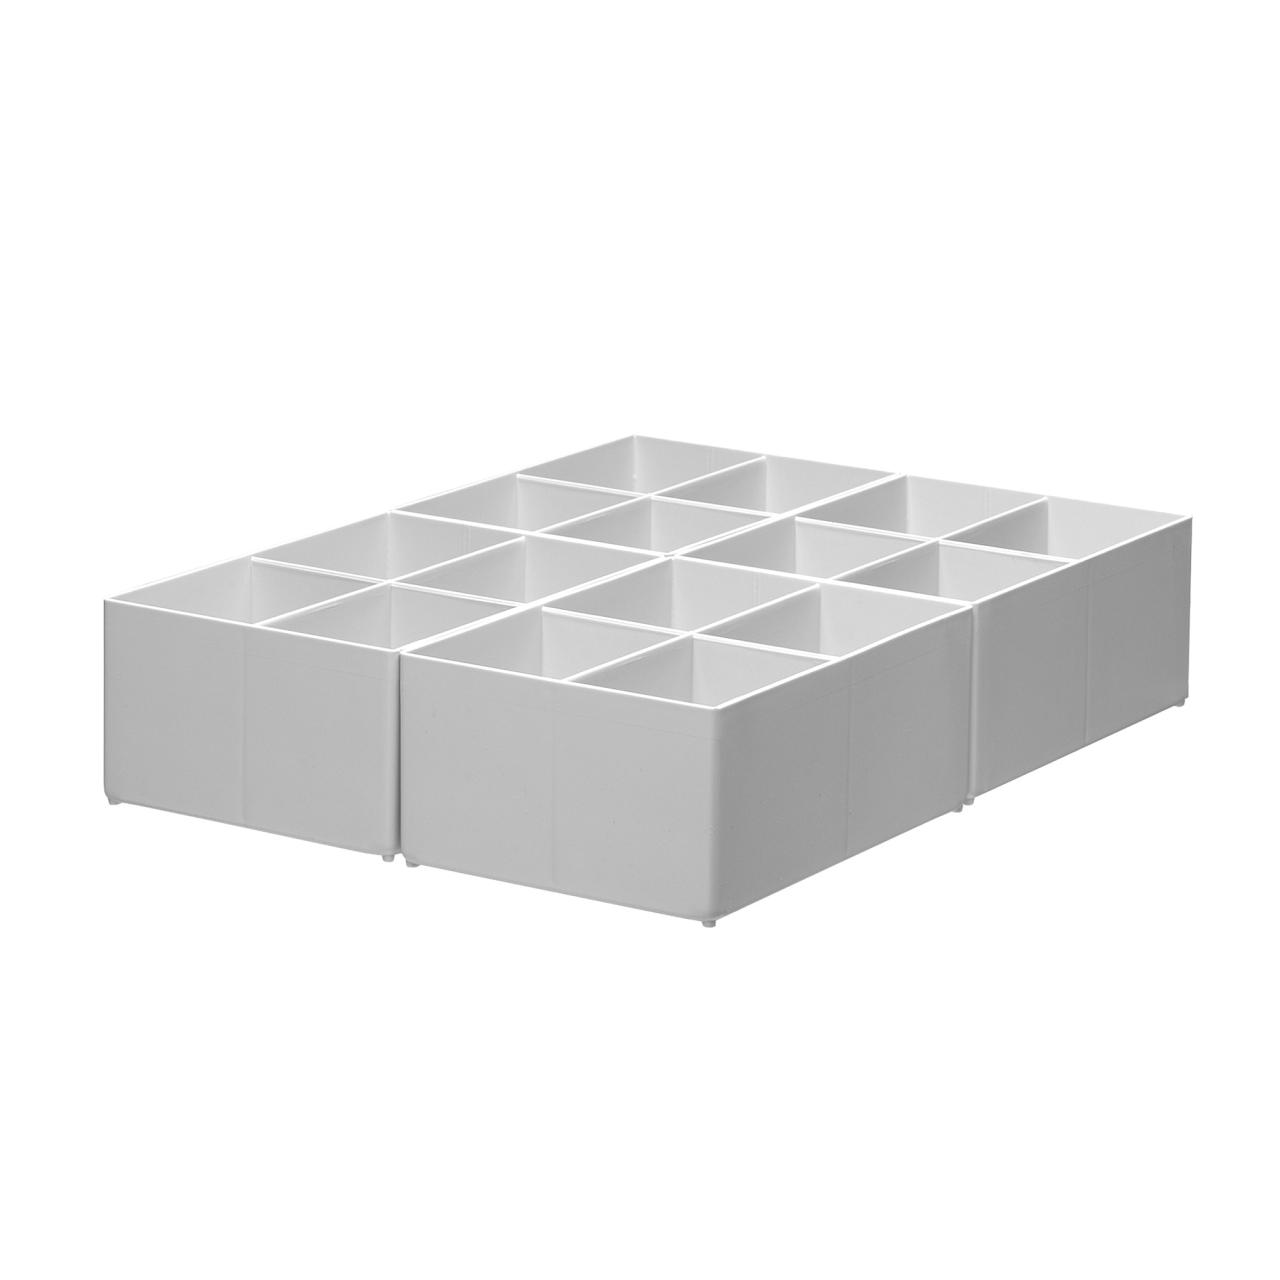 Insert Boxes, high, 4 boxes per drawer, 4 compartments